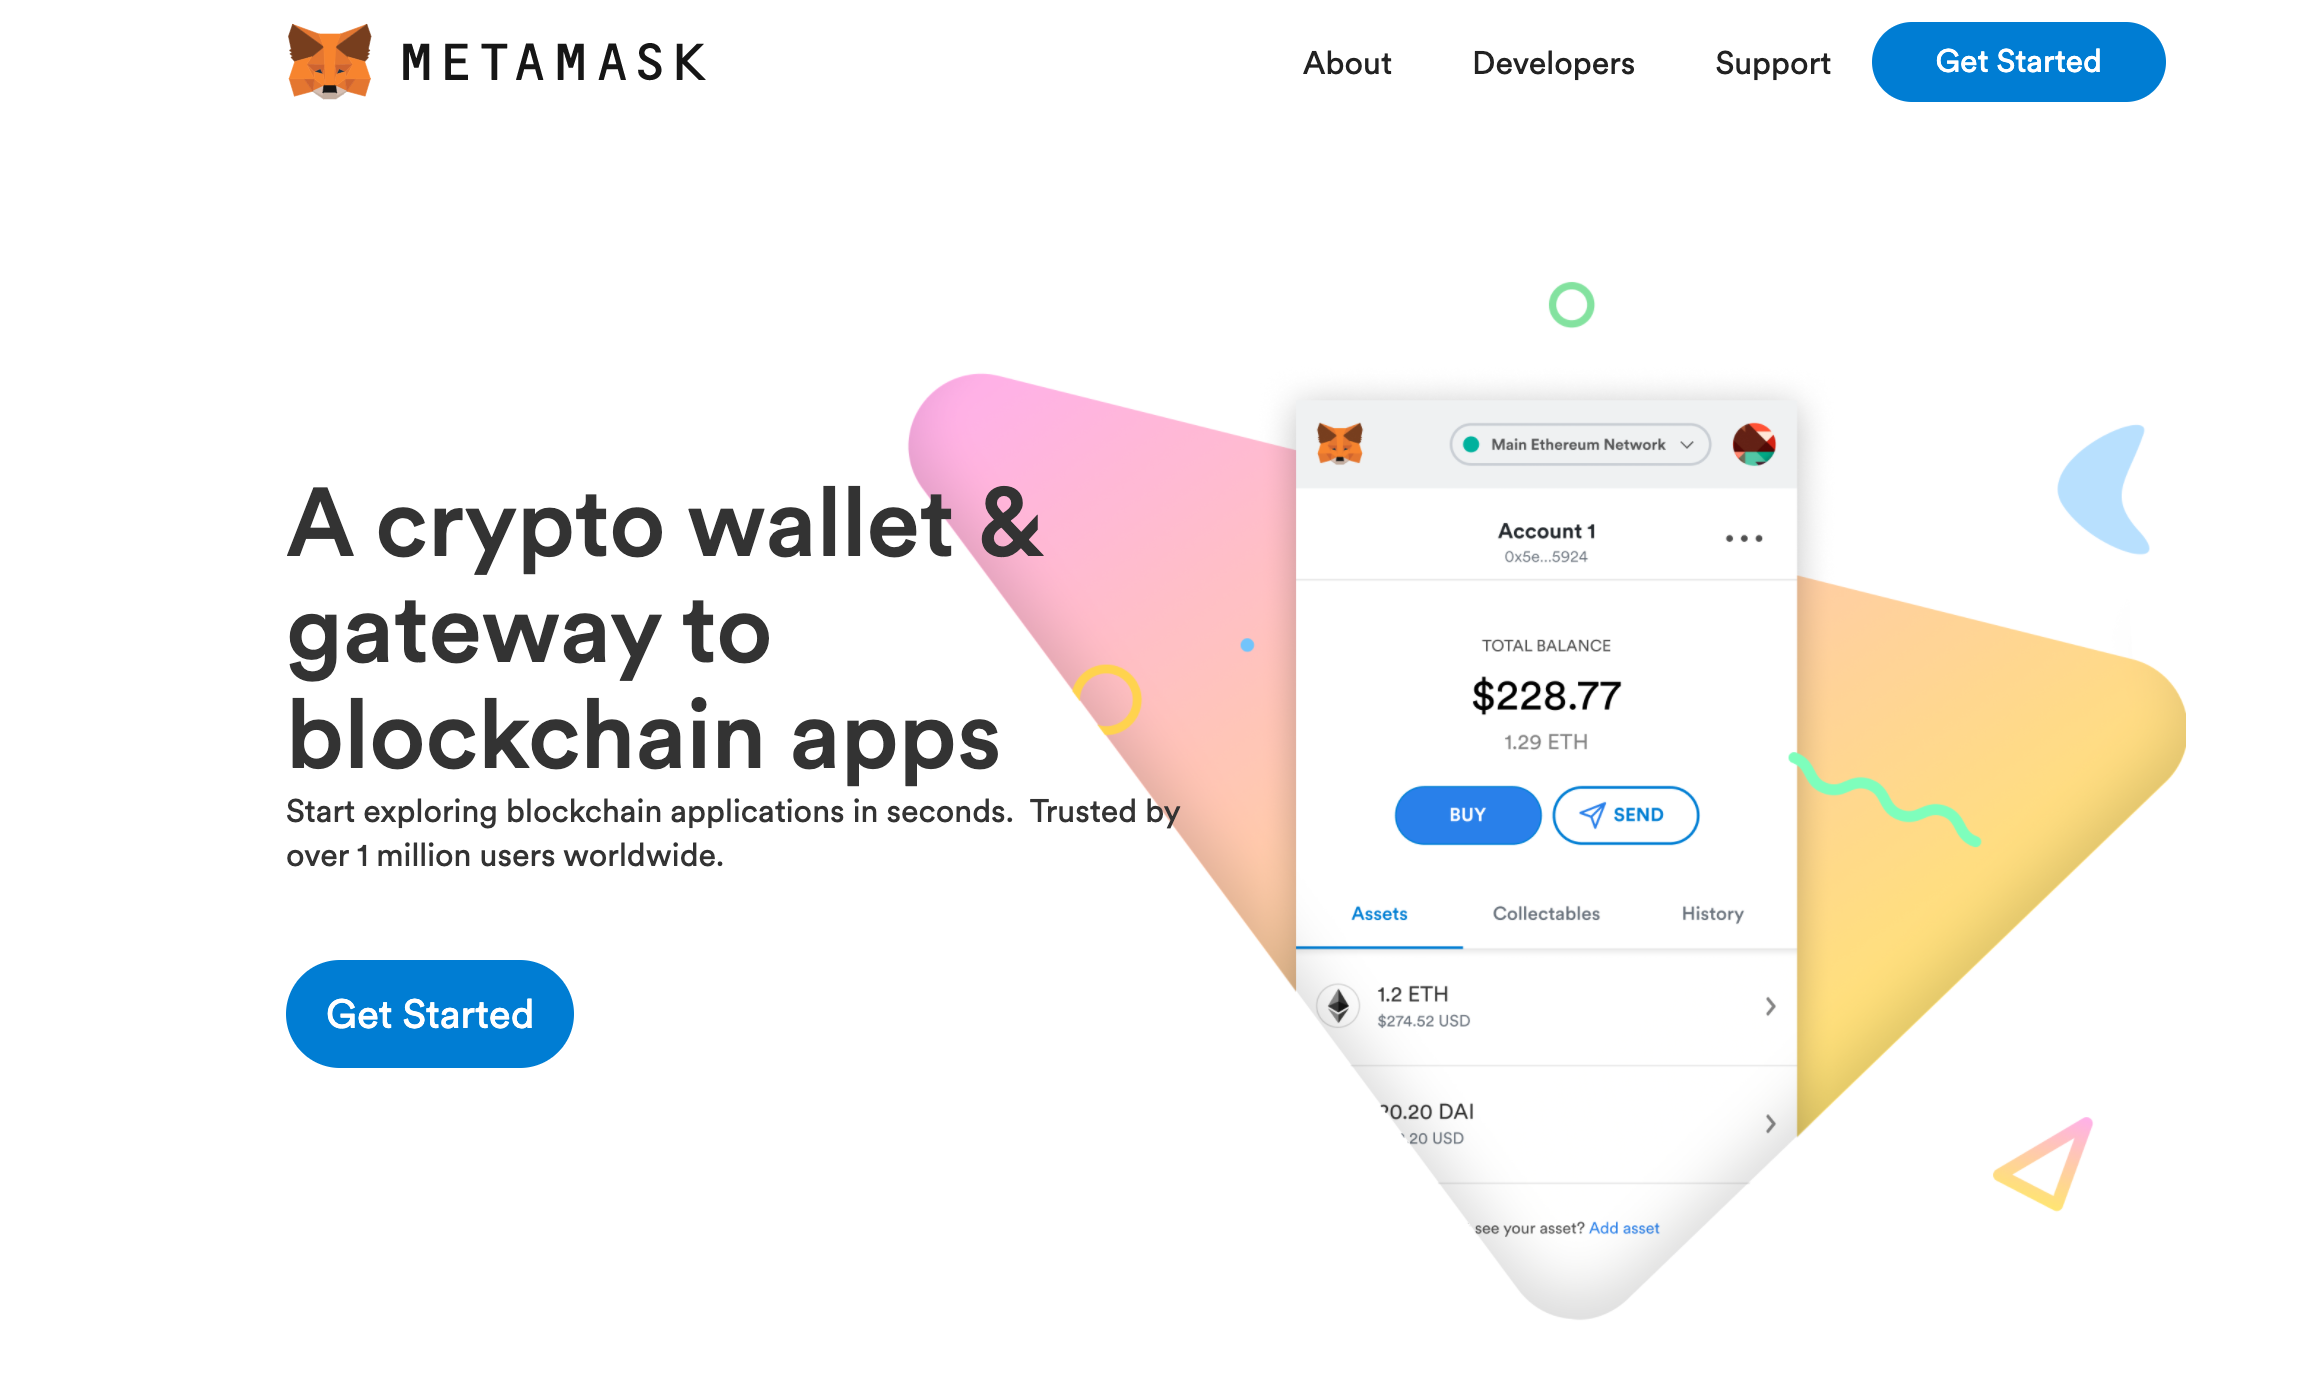 is metamask considered an ethereum wallet